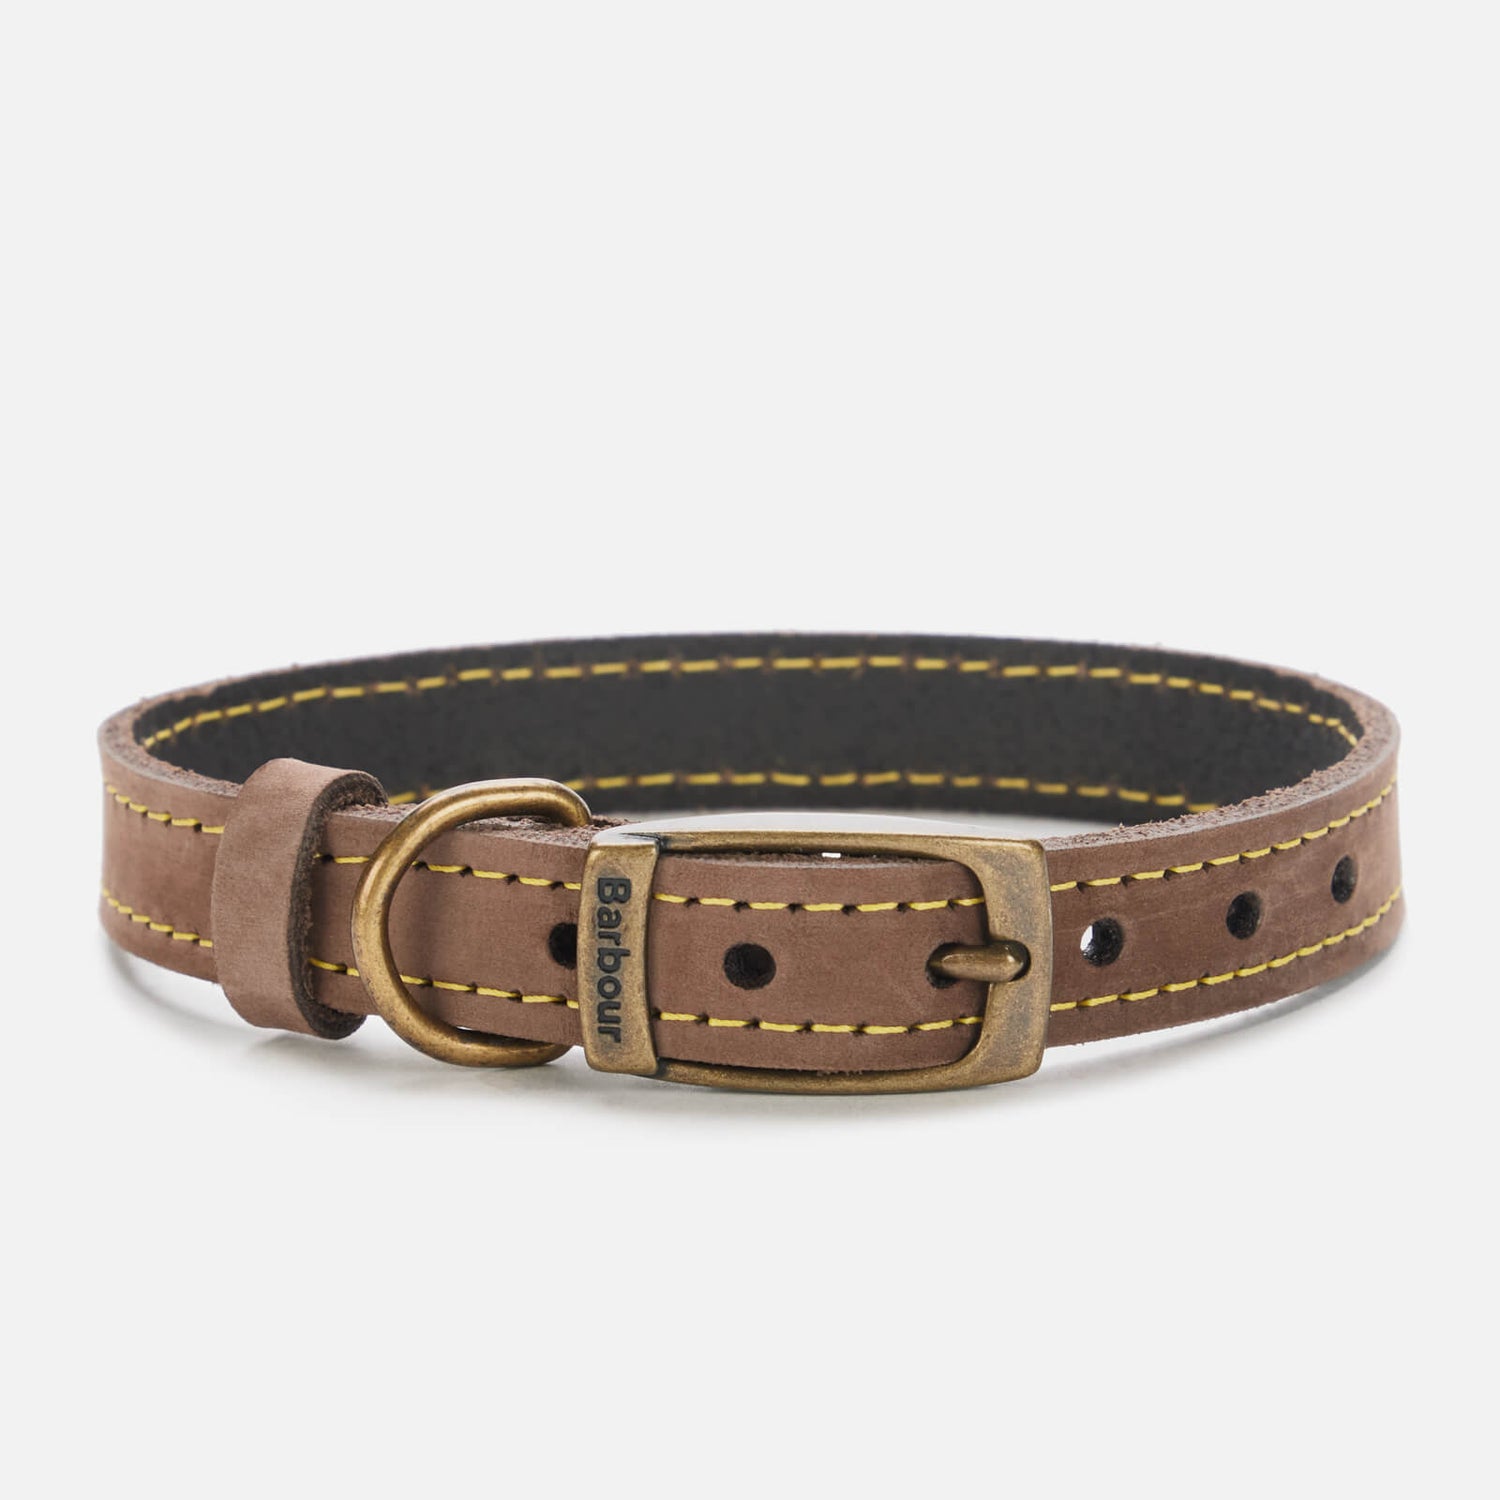 Barbour Leather Dog Collar - Brown - M